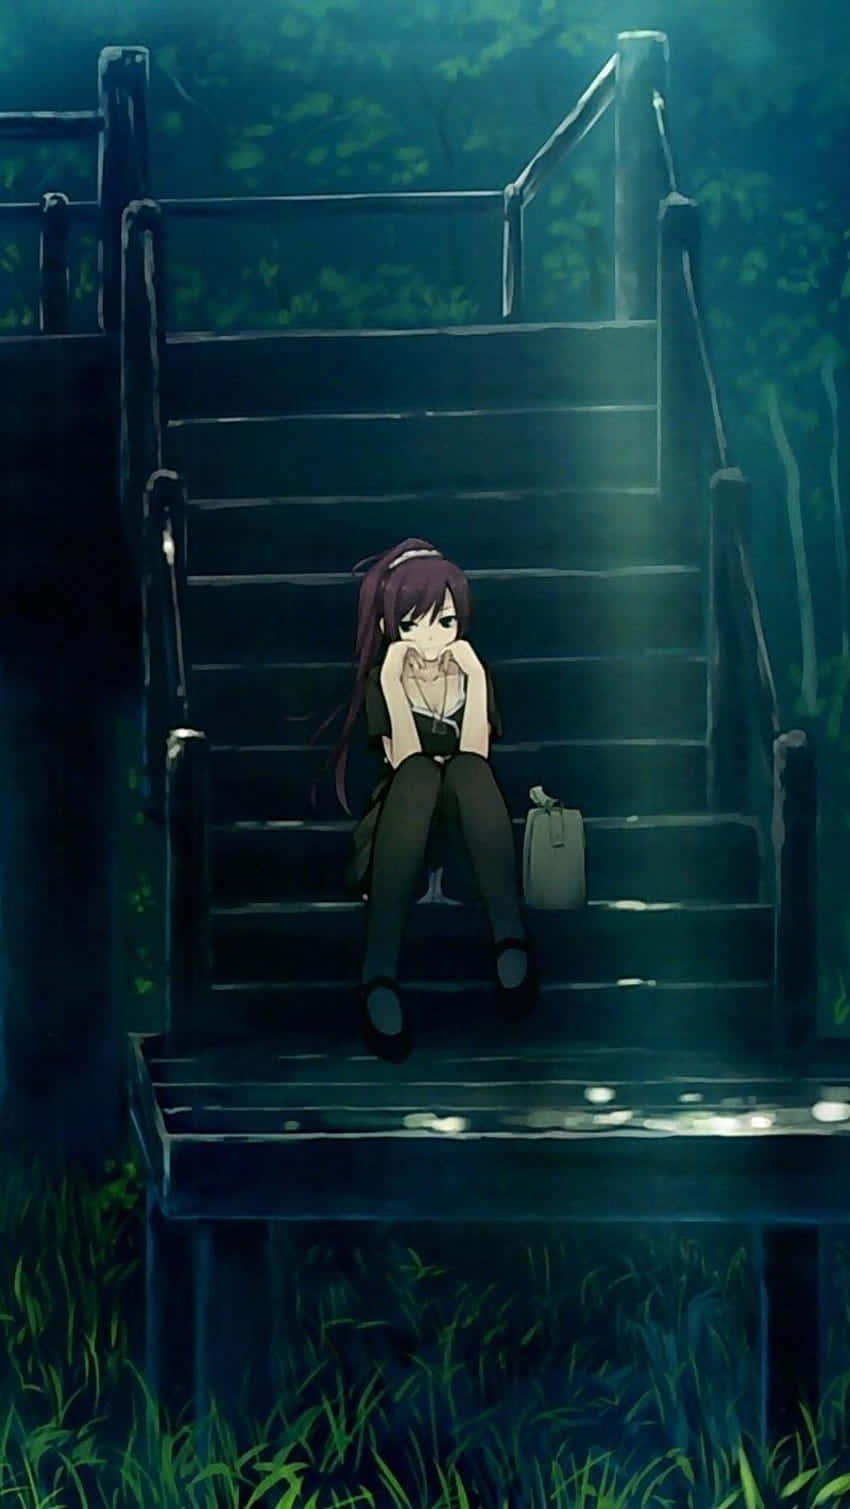 A Depressed Anime Girl Sitting Alone In Her Room With A Broken Heart Wallpaper